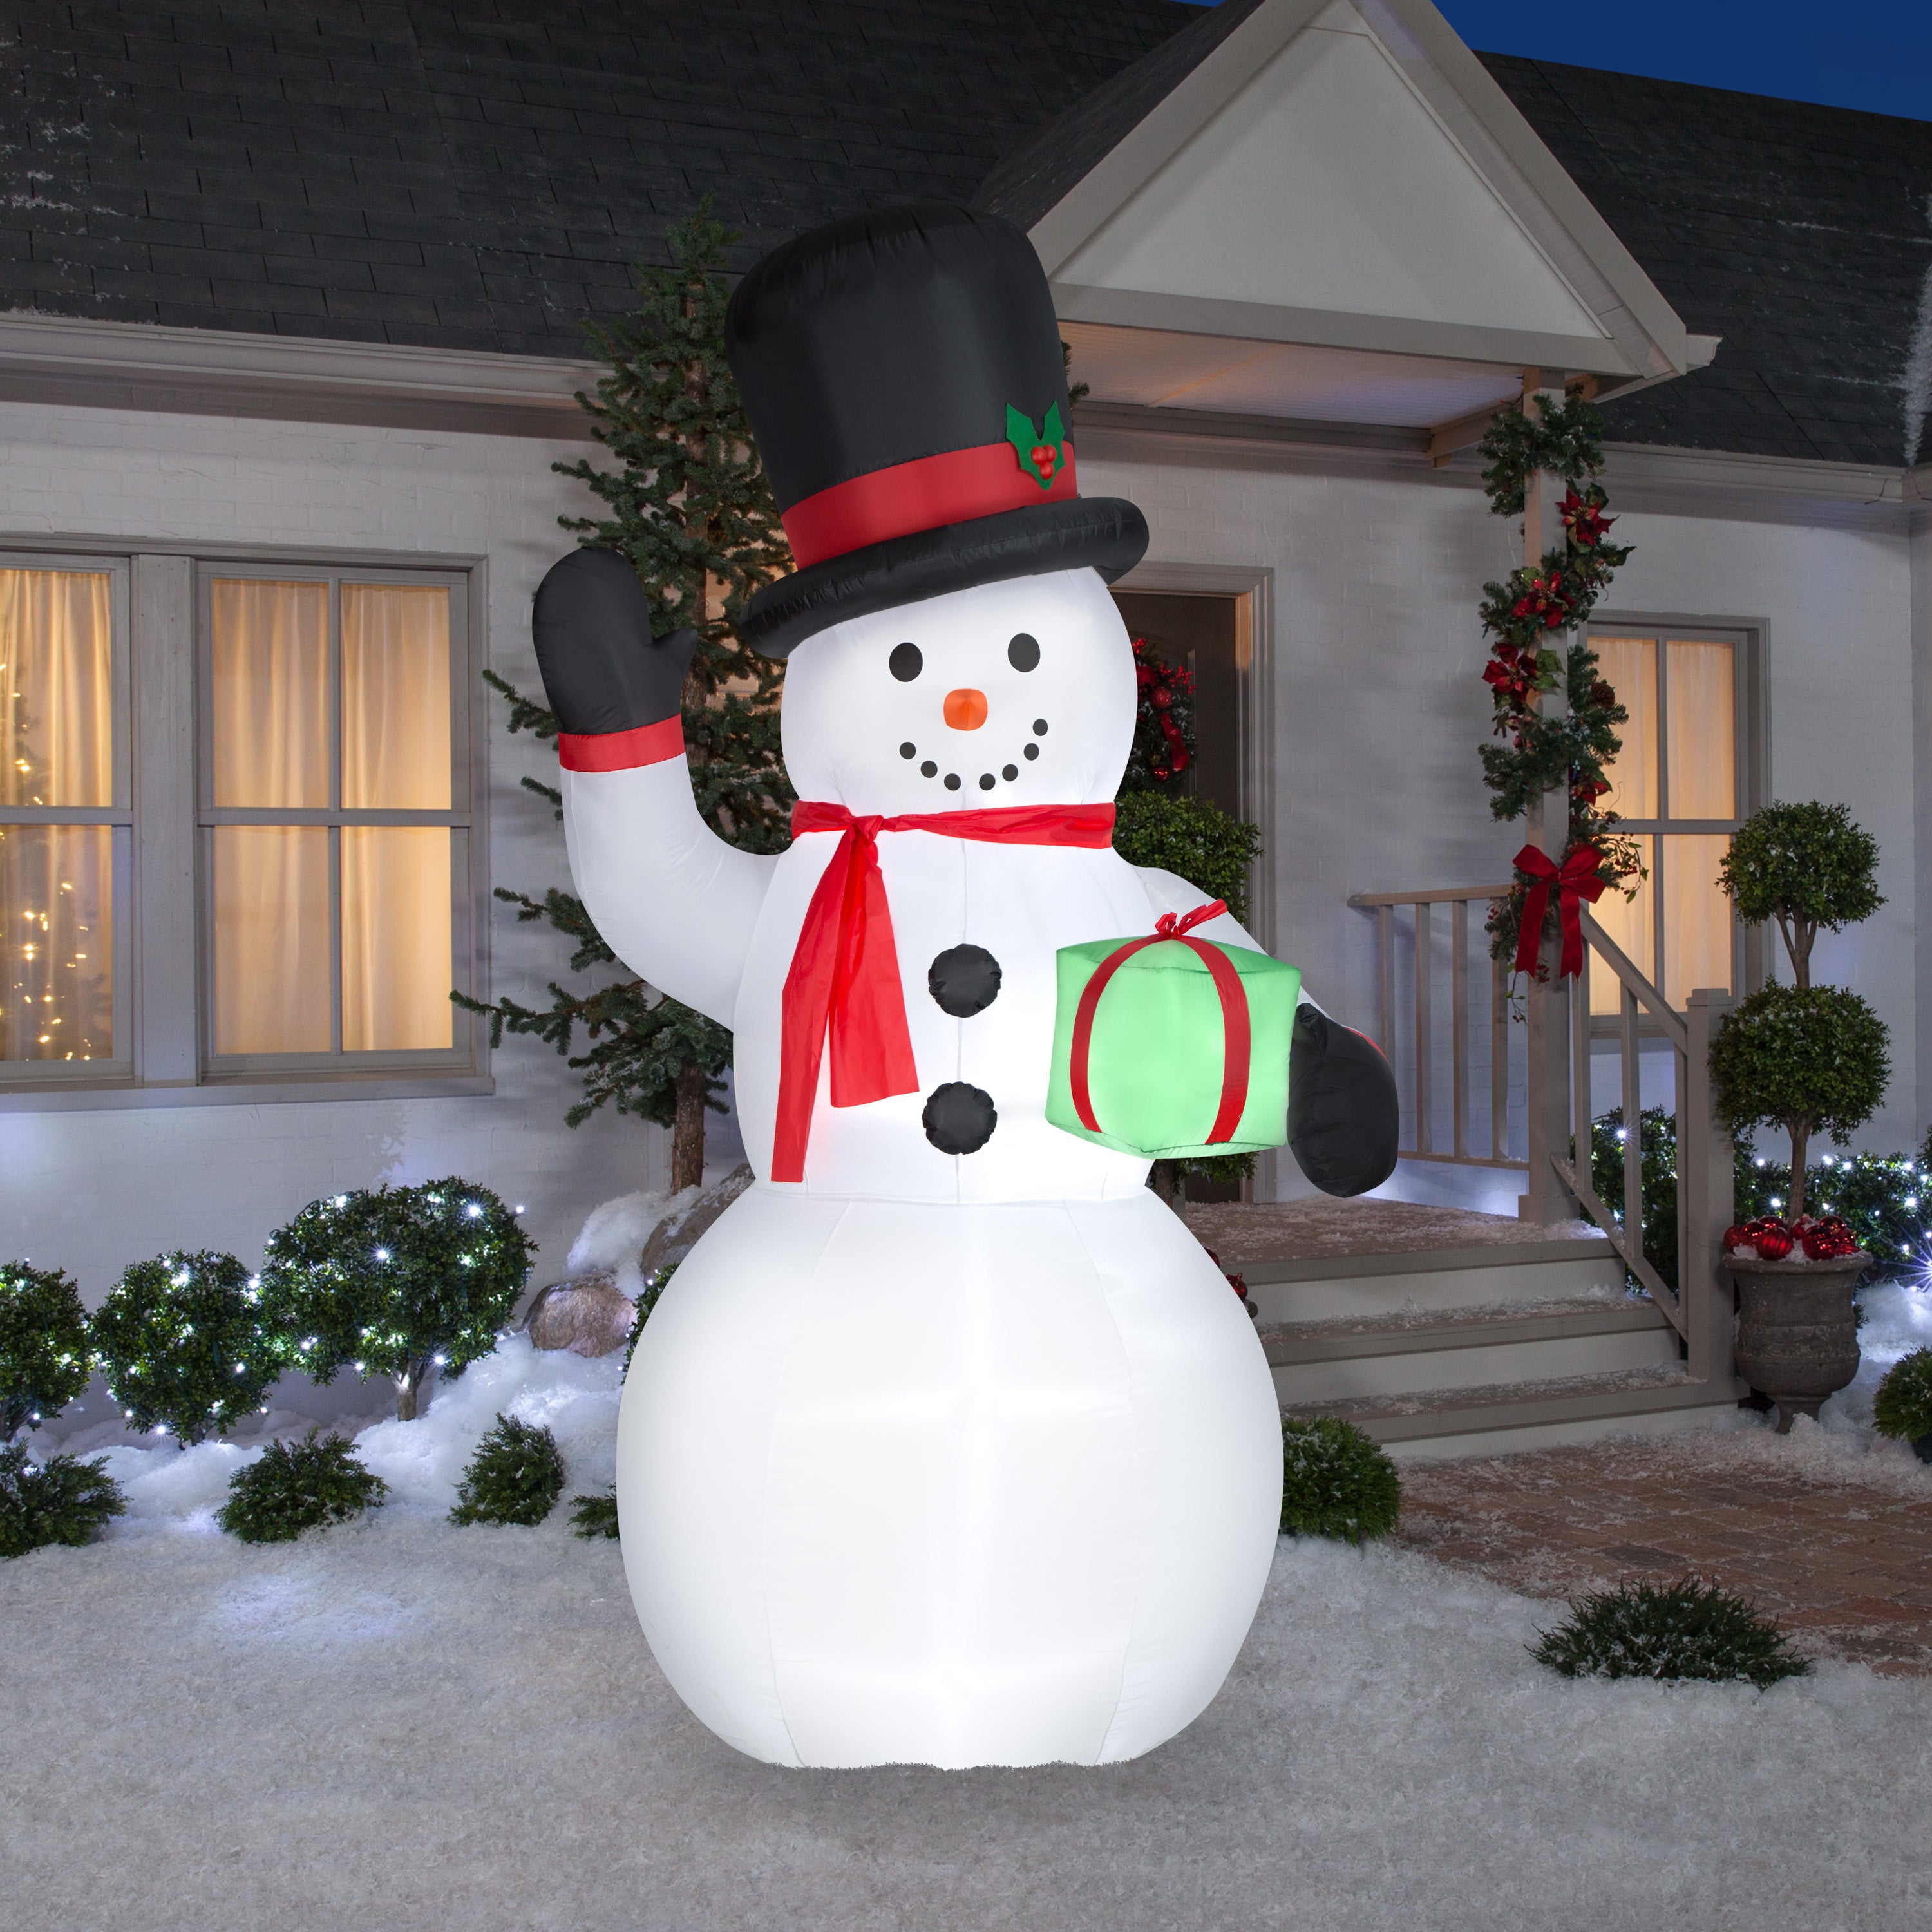 Gemmy Christmas Airblown Inflatable Snowman w/Gift Box Giant, 10 ft Tall, White